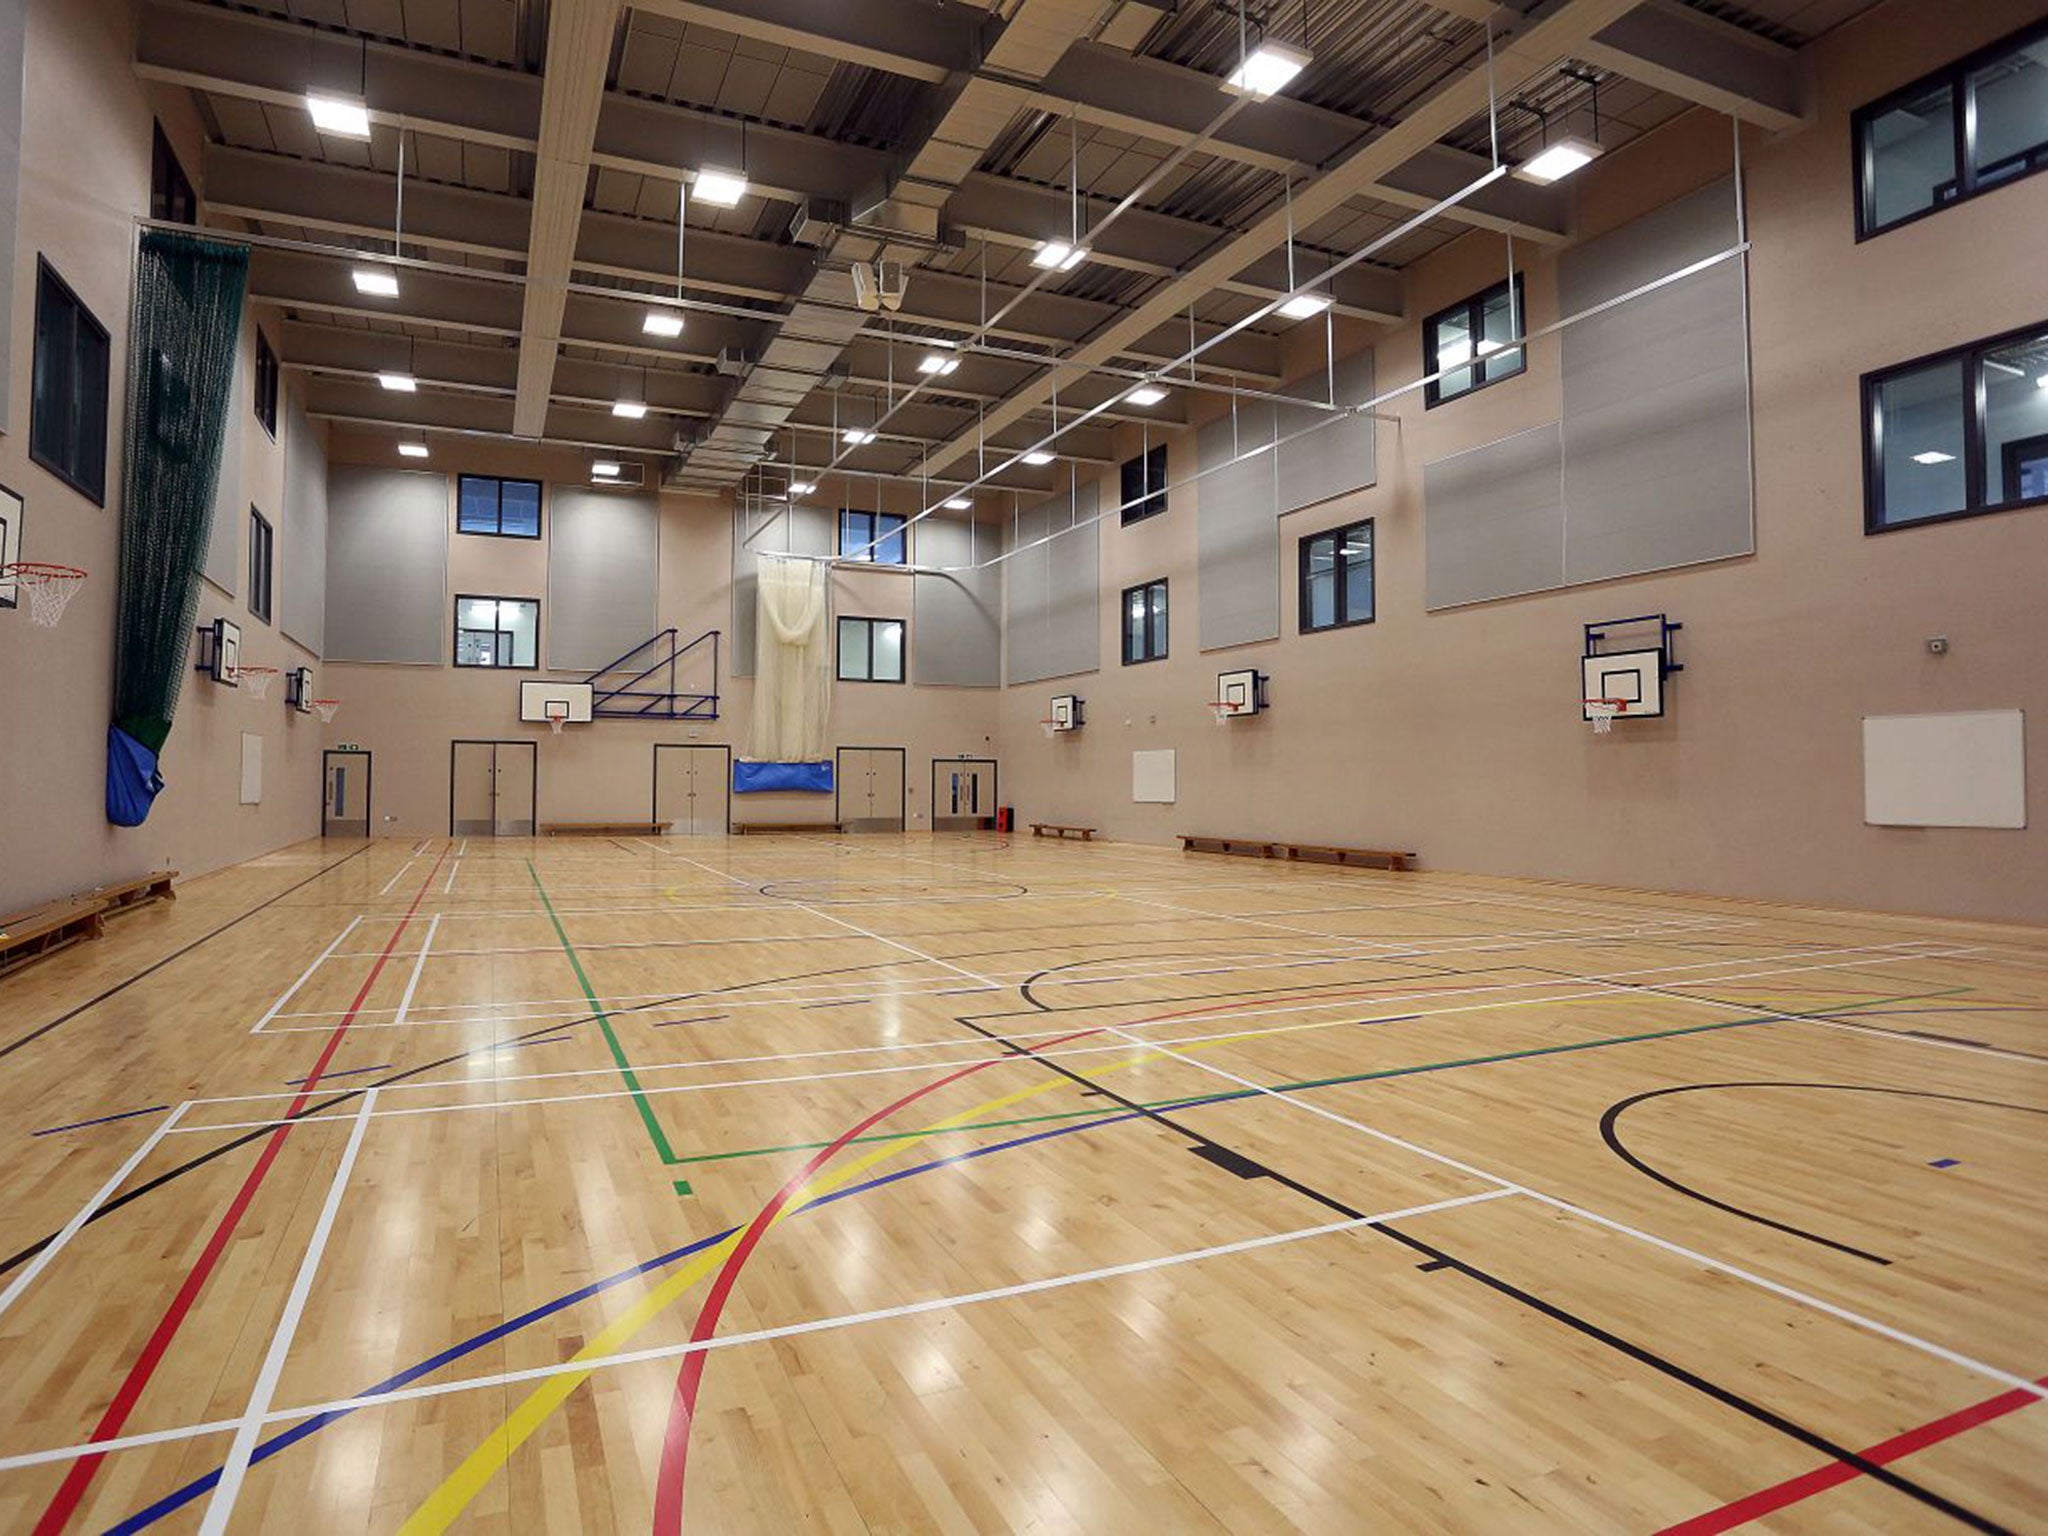 The Sports Hall has been installed as part of the new £30m building (Susannah Ireland)